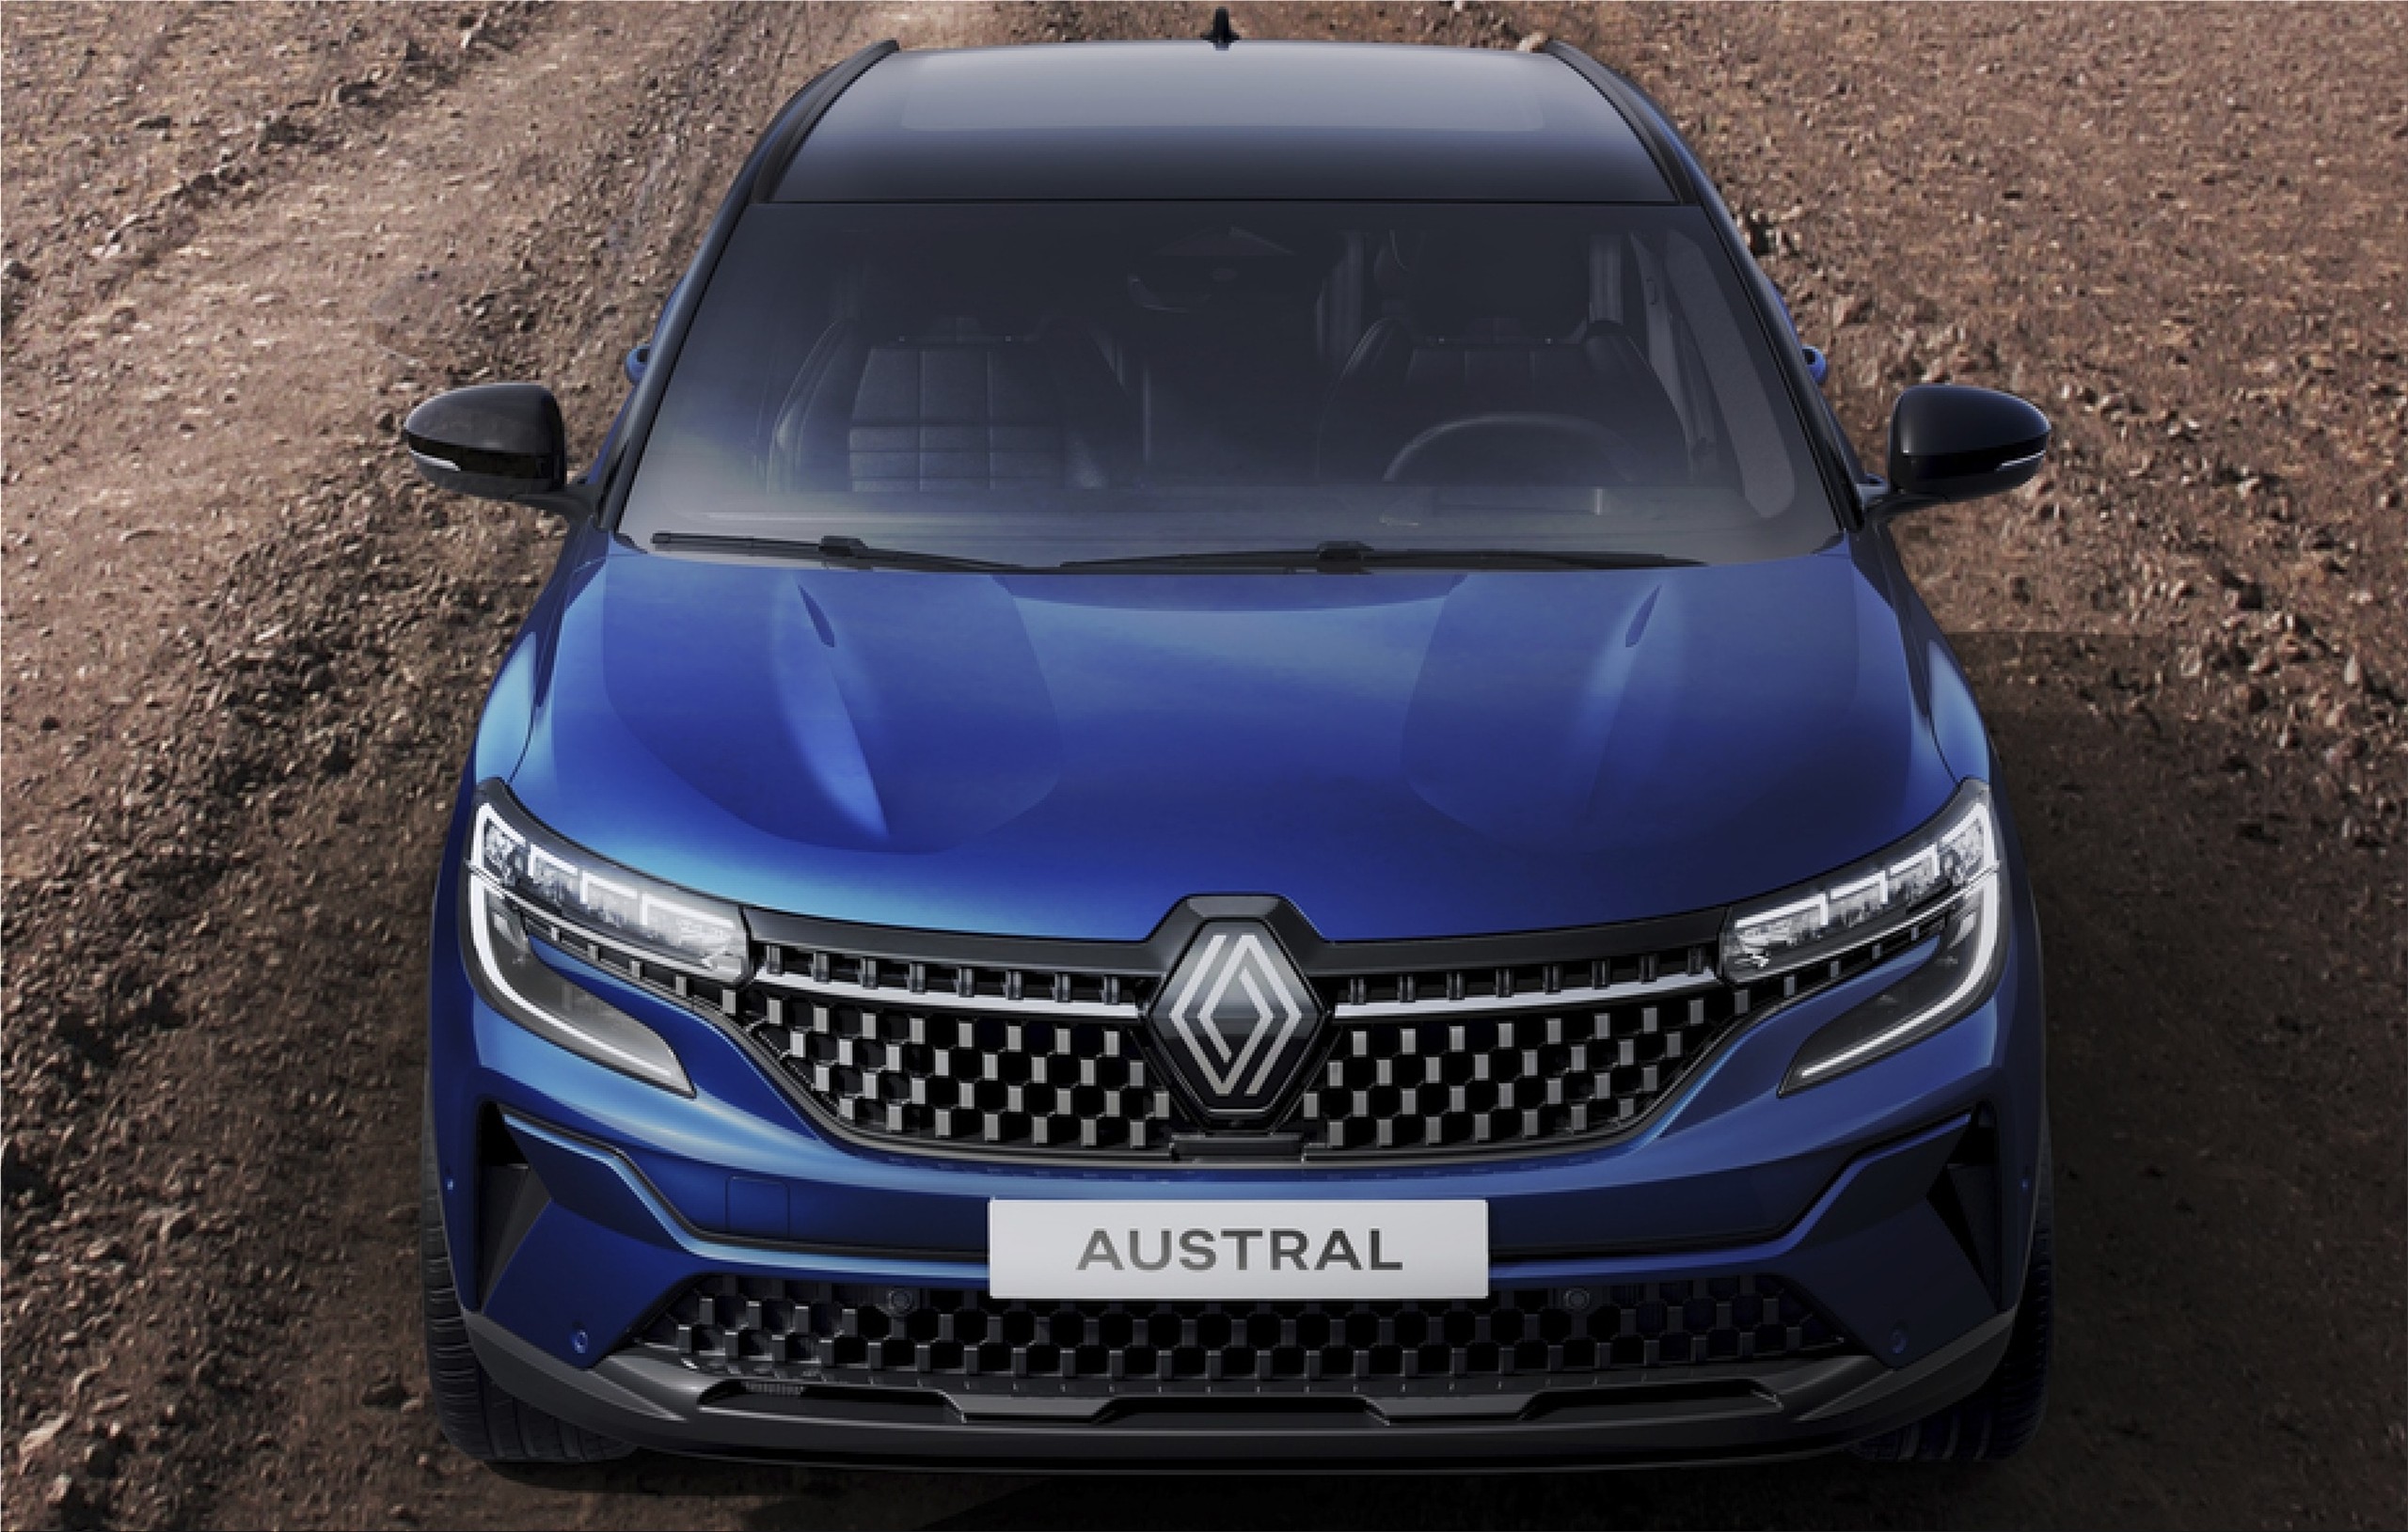 Renault Austral E-Tech: prices, specs and CO2 emissions